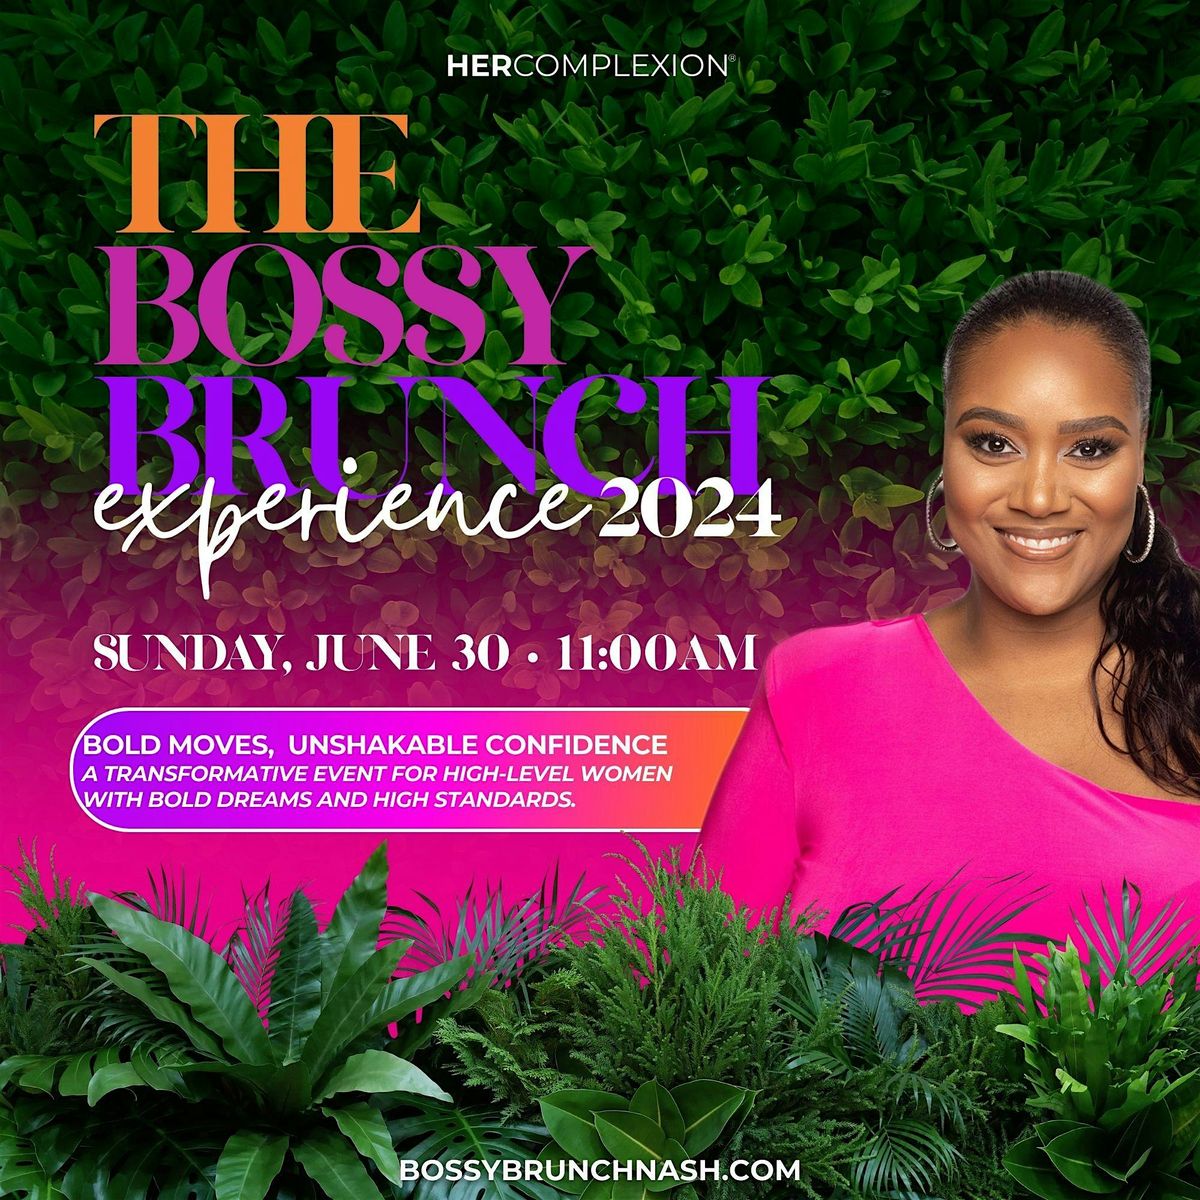 The Bossy Brunch Experience 2024